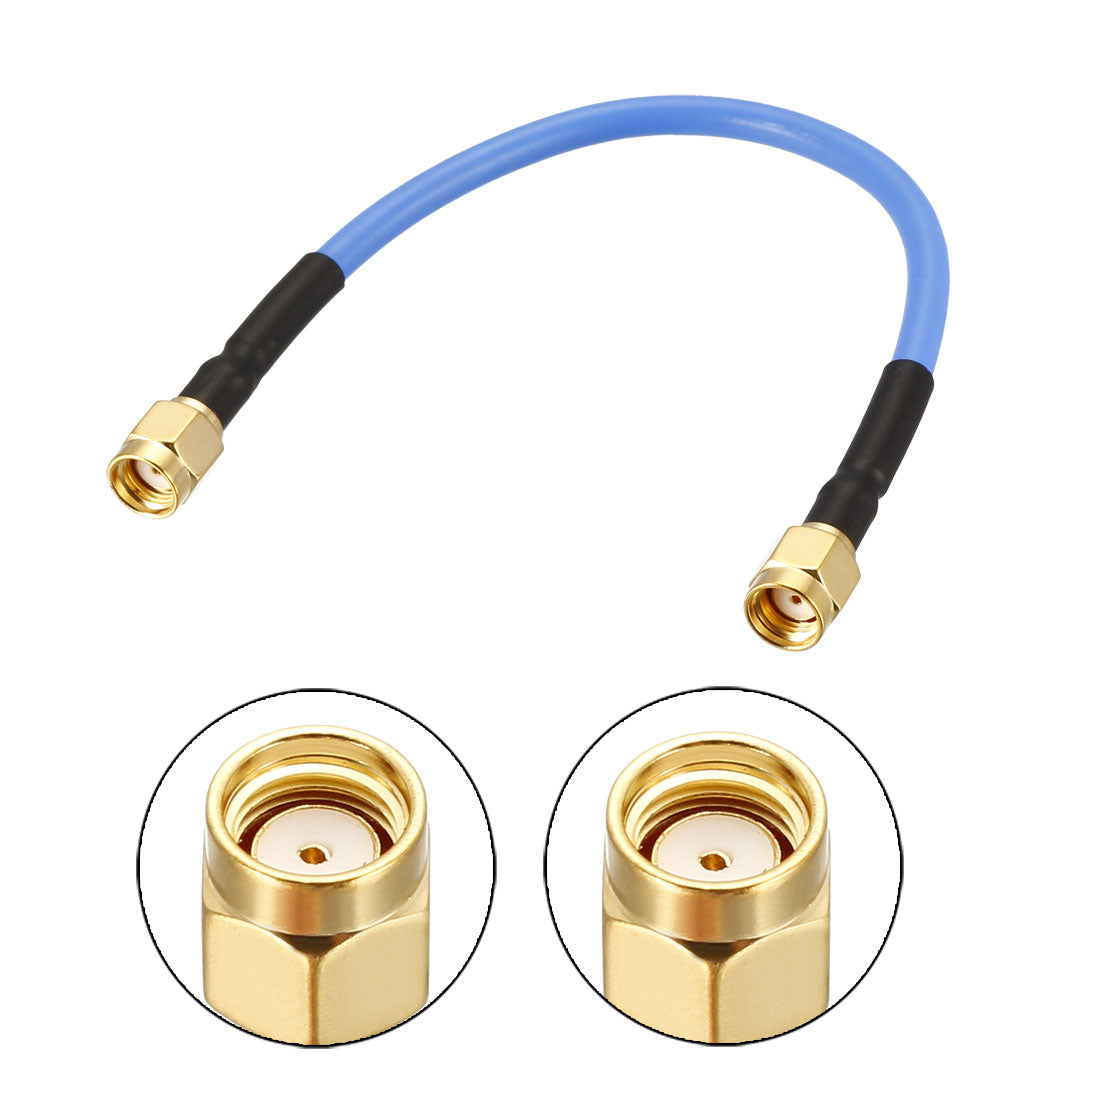 Uxcell Uxcell RP-SMA Male to RP-SMA Male RG402 RF Coaxial Coax Cable 0.15M/0.5Ft